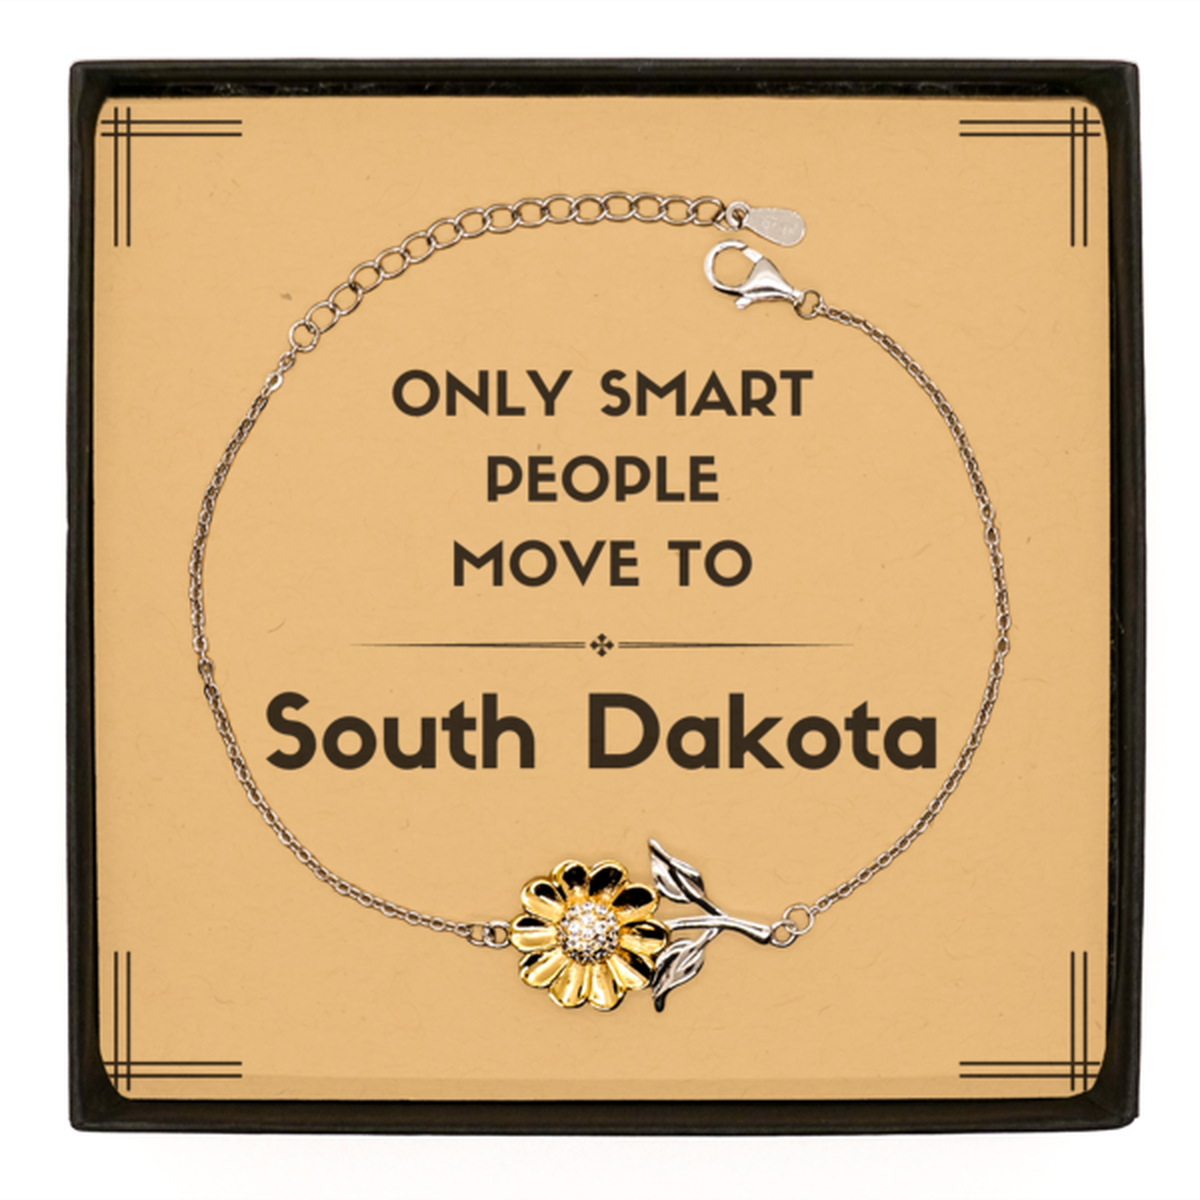 Only smart people move to South Dakota Sunflower Bracelet, Message Card Gifts For South Dakota, Move to South Dakota Gifts for Friends Coworker Funny Saying Quote